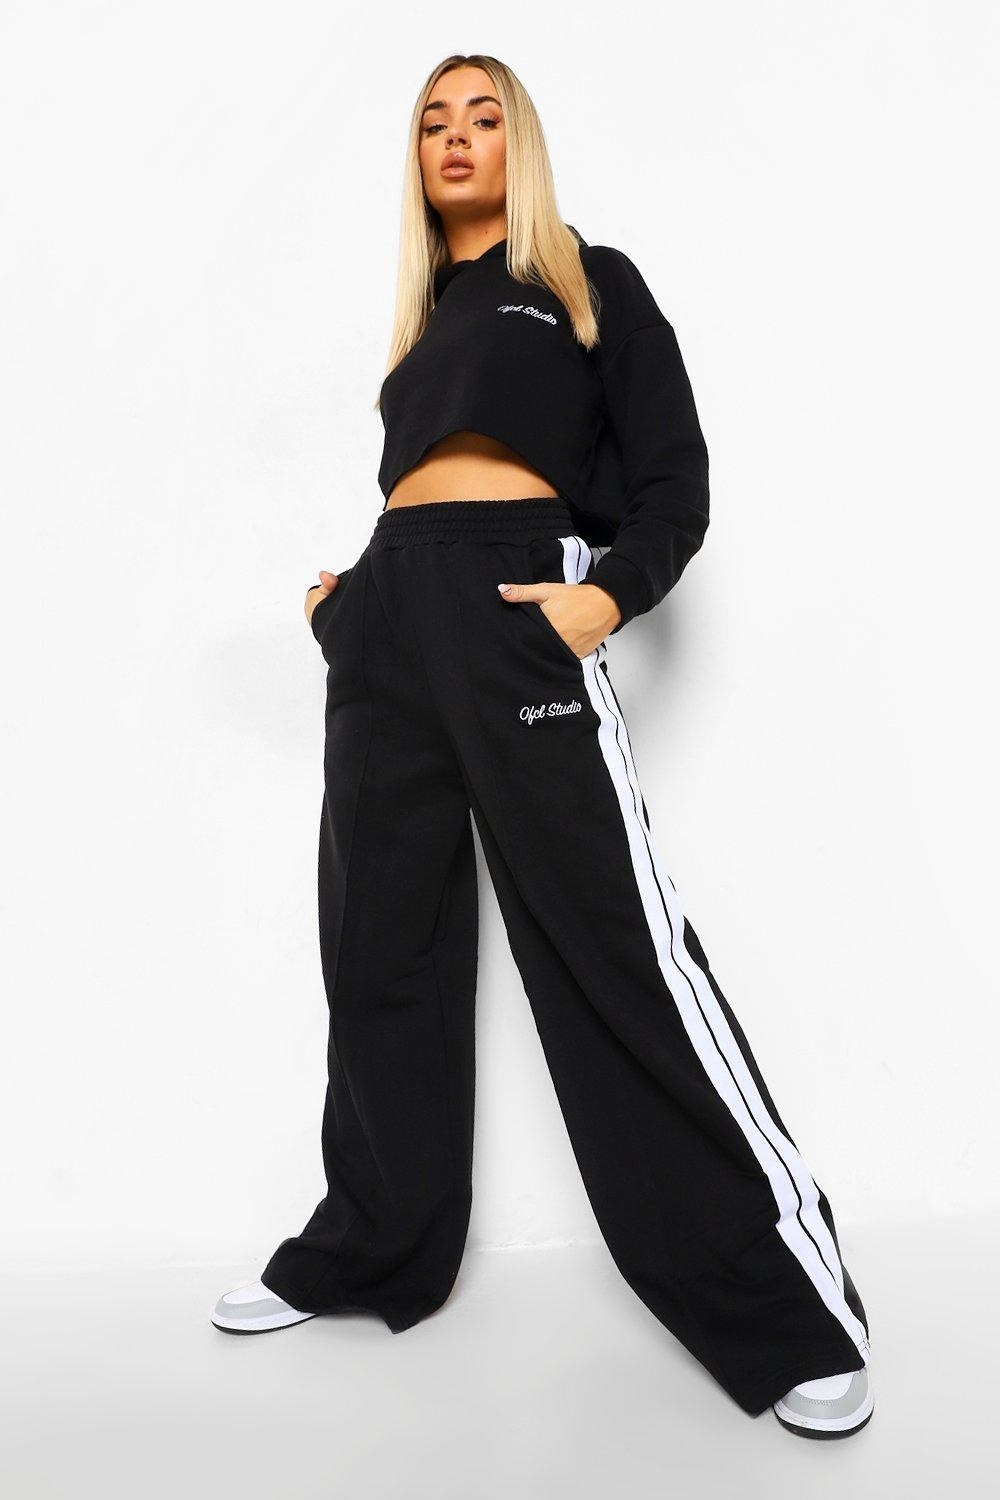 Model wearing black and white-striped tracksuit